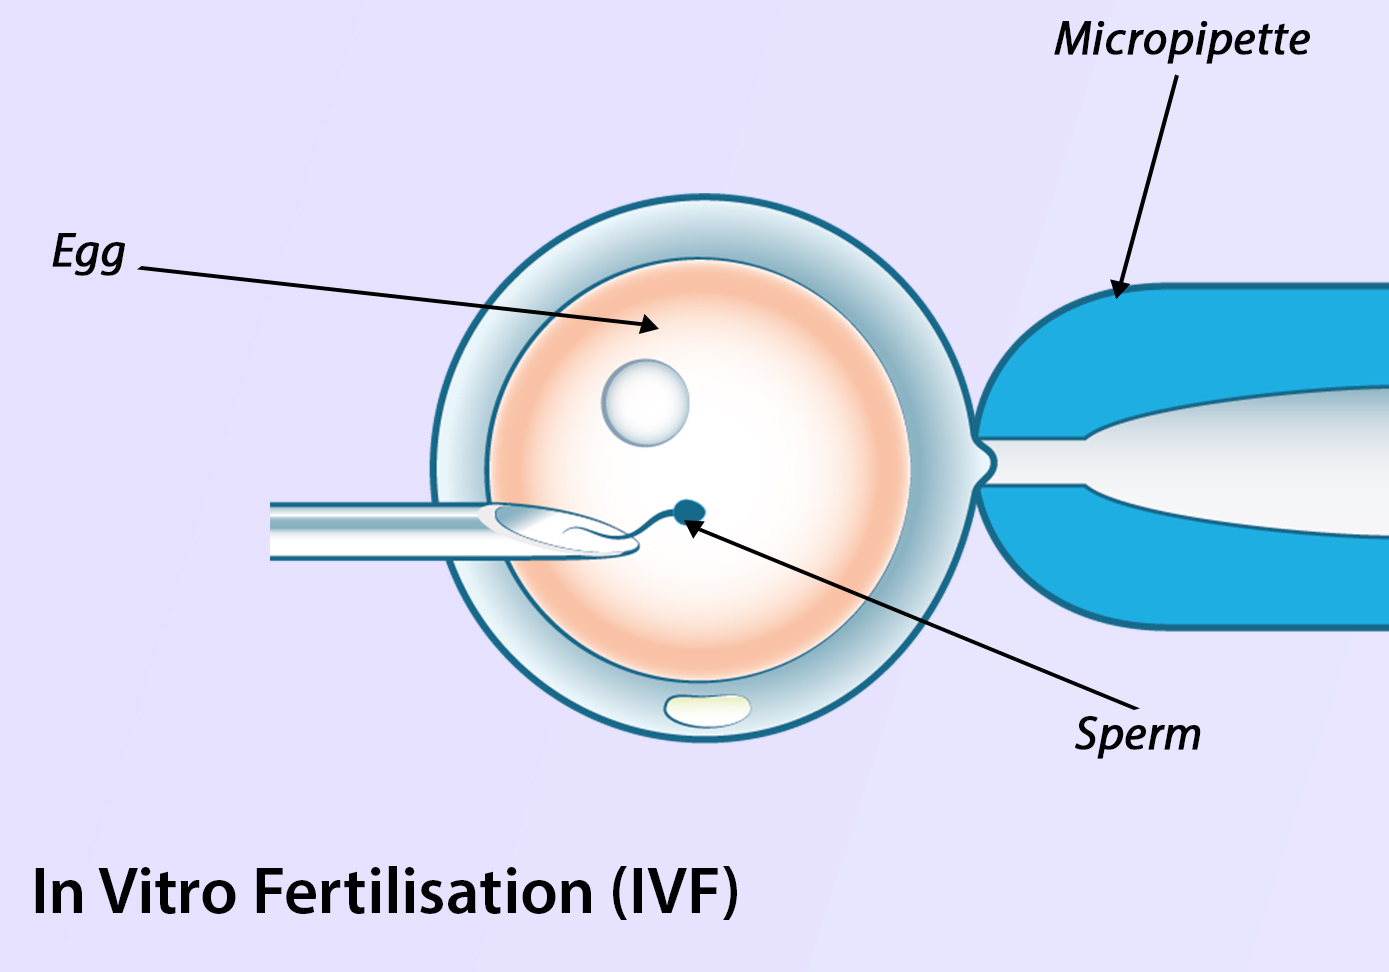 IUI and IVF